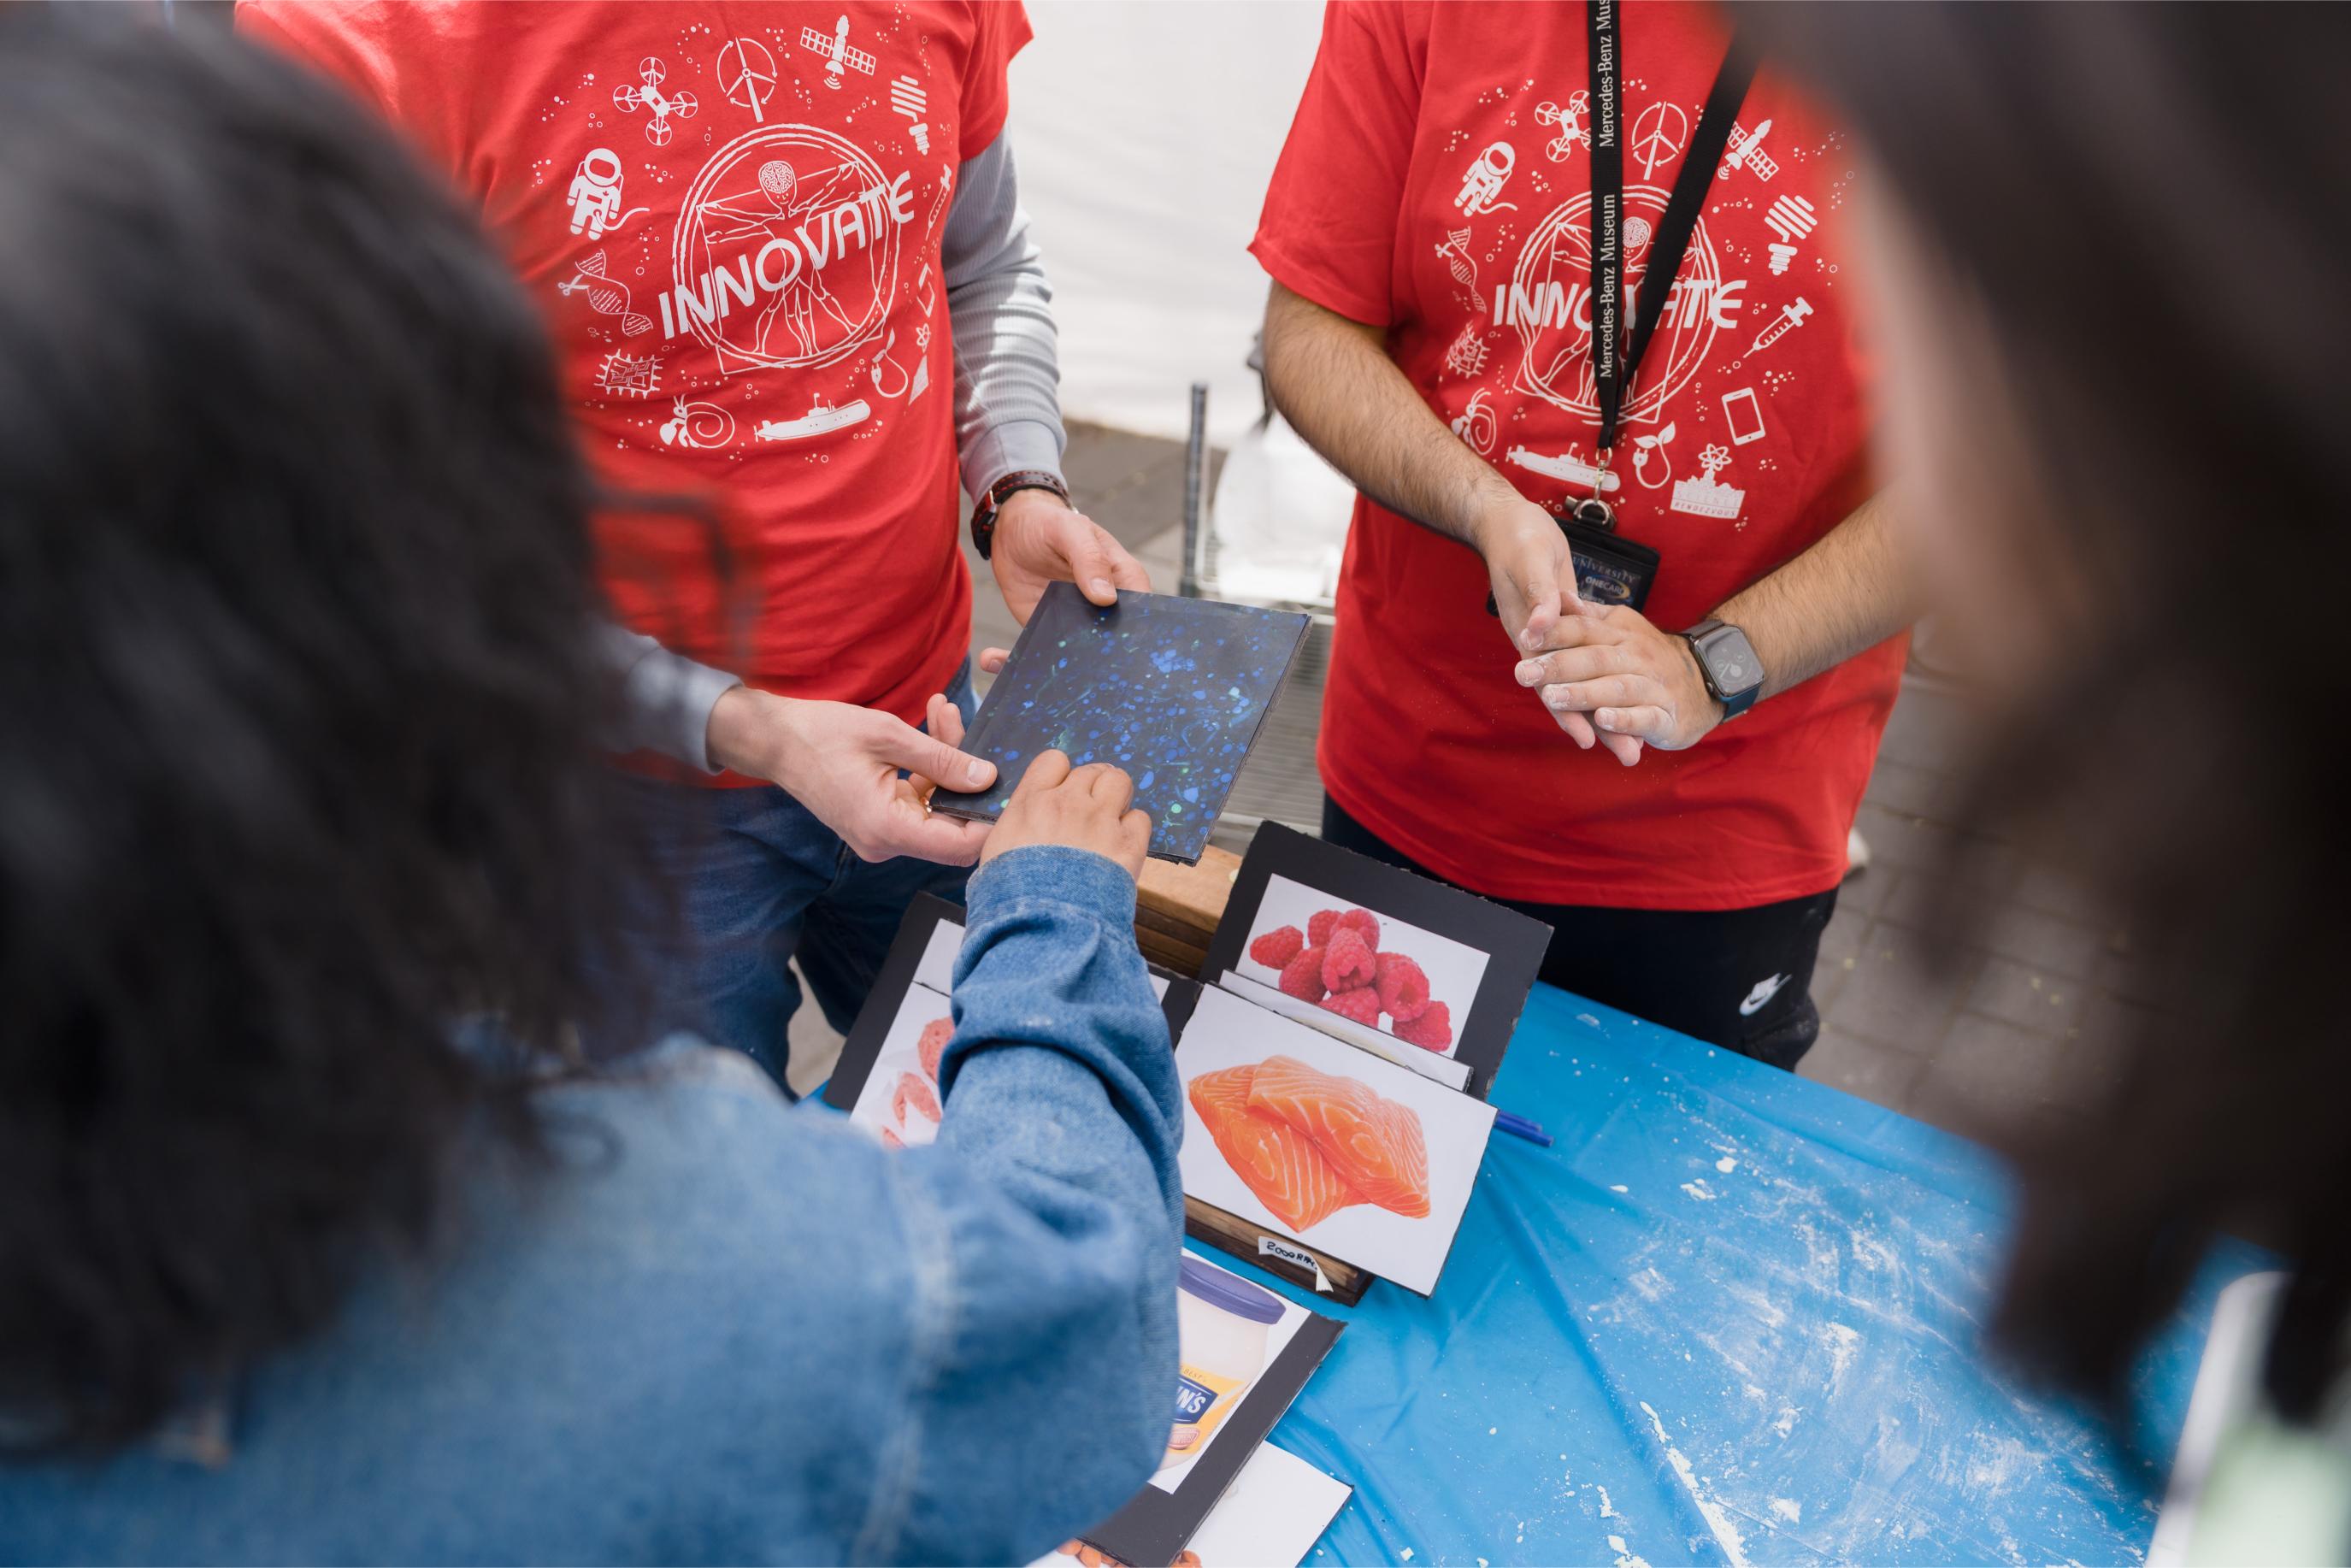 Participant engaging in an activity at the Food Science Booth.